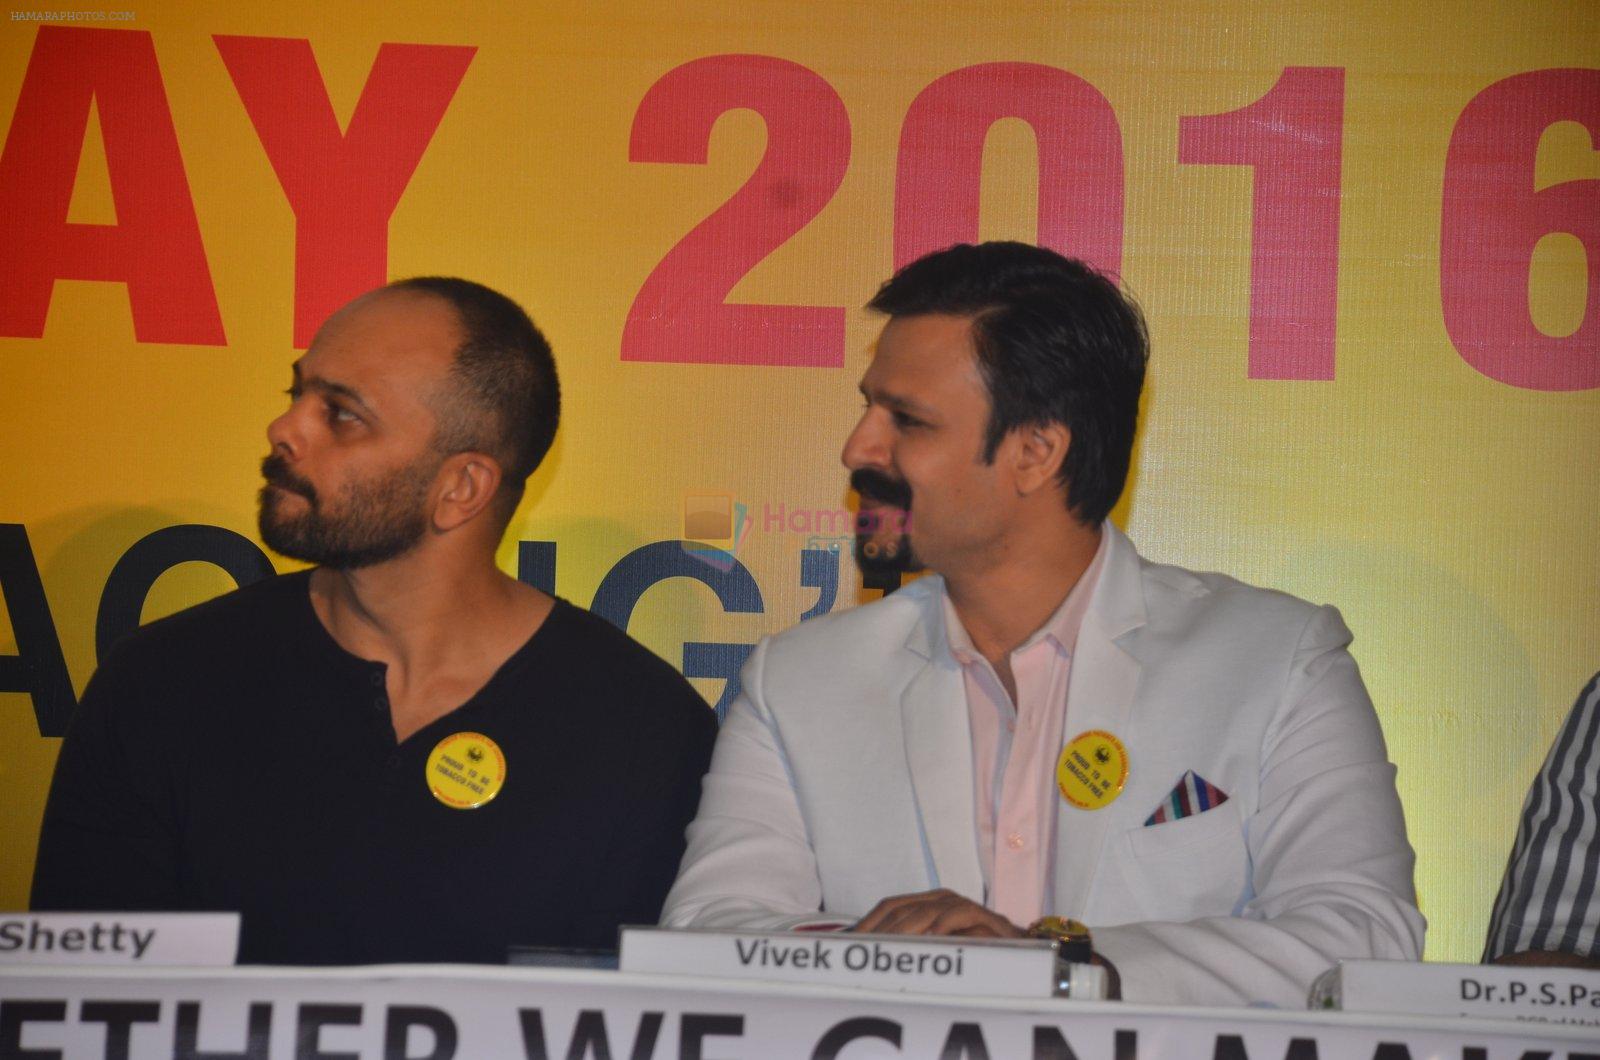 Vivek Oberoi and Rohit Shetty at an event to support fight against Tobacco and Cancer and the cause in Mumbai on 11th June 2016